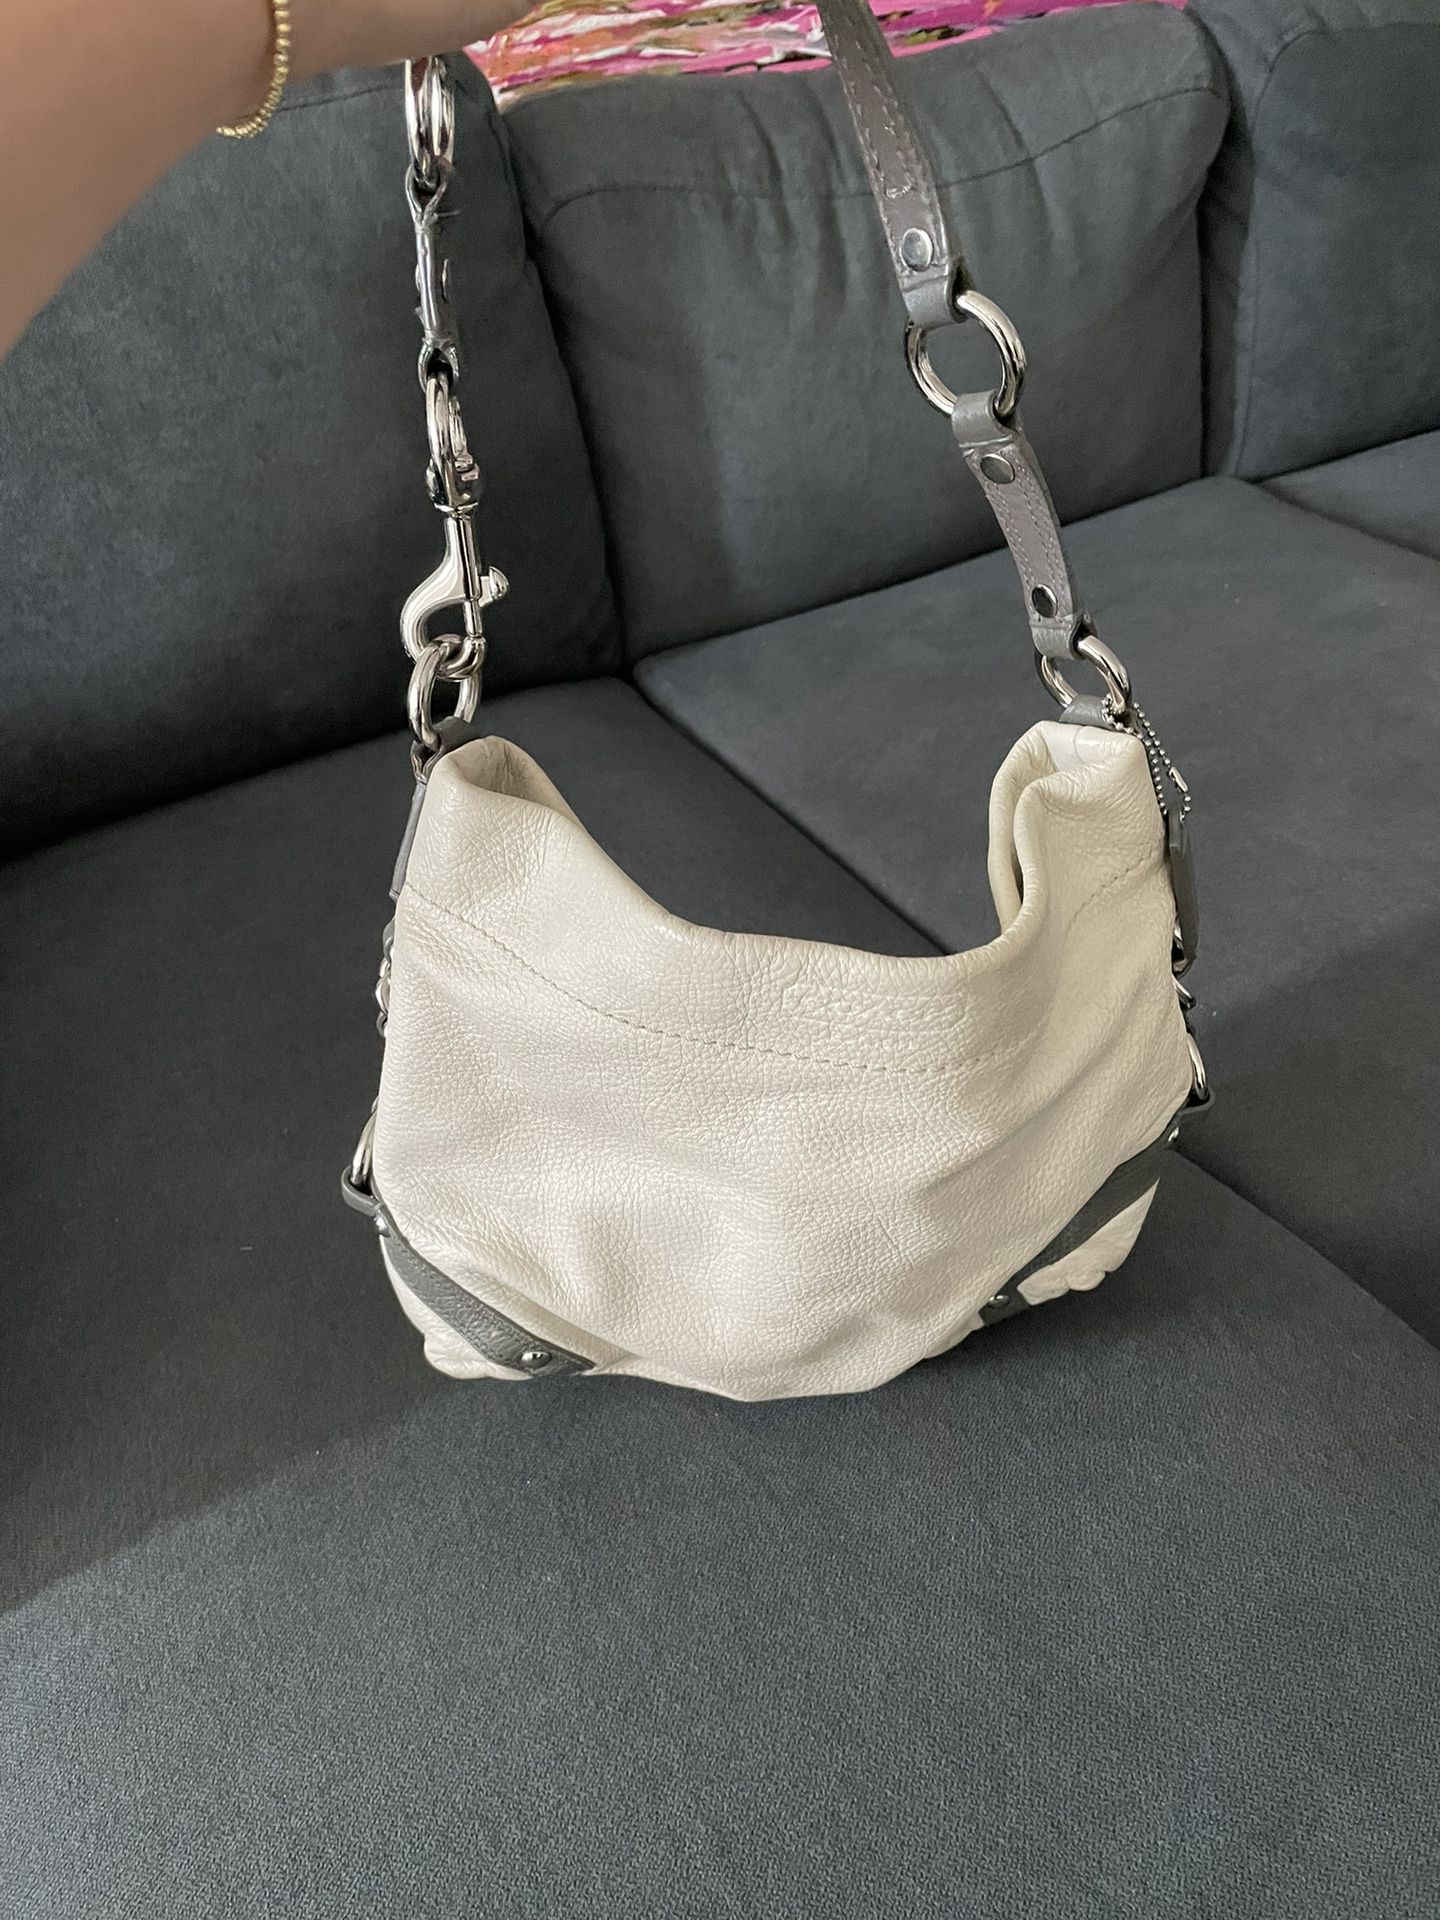 COACH Nice White Cream Leather Bag Silver Accents 